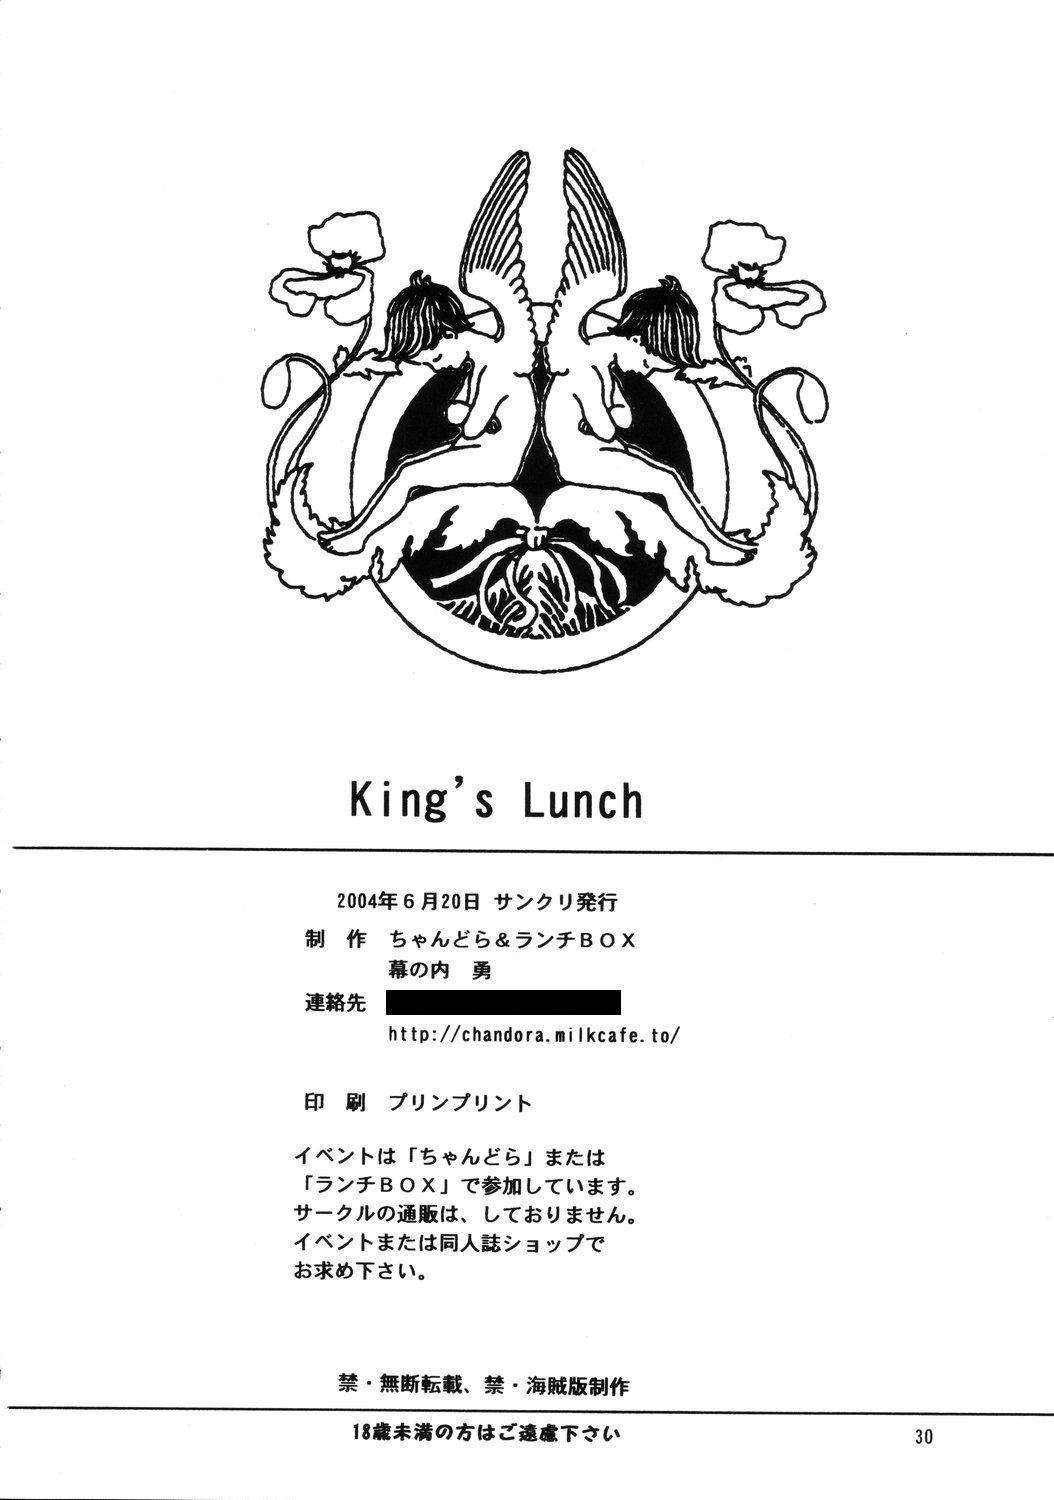 Lunch Box 62 - King's Lunch 28